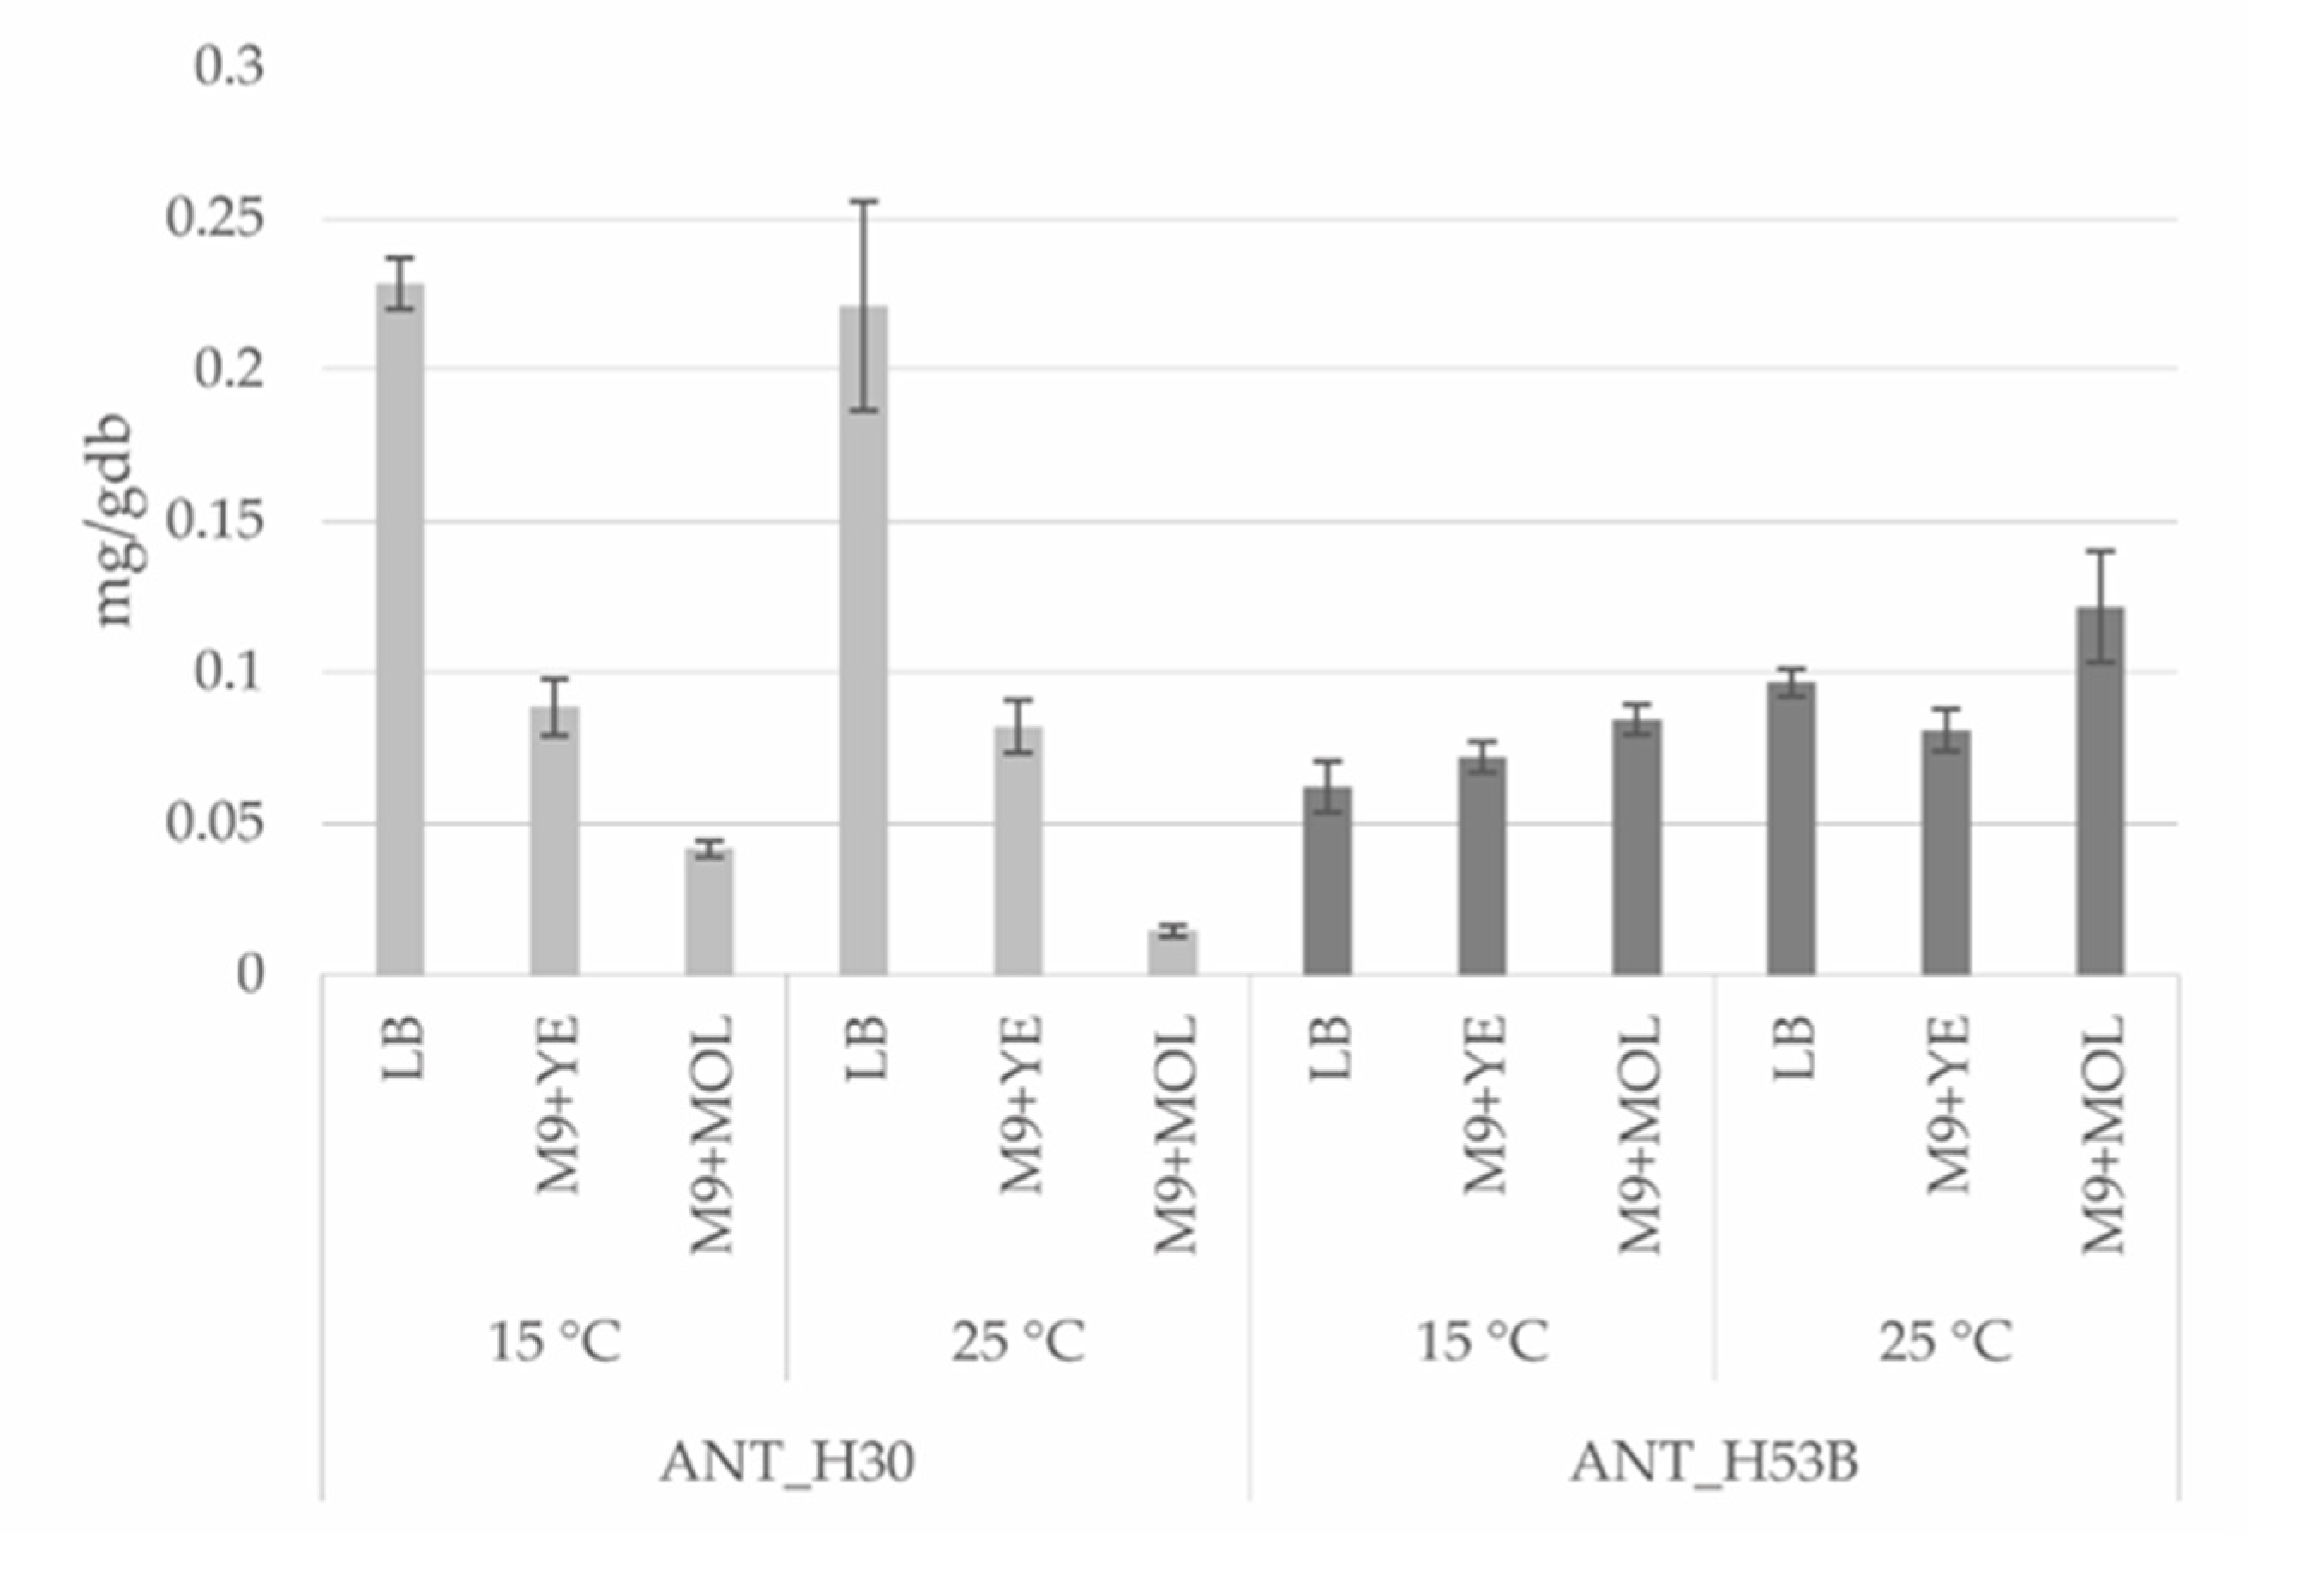 Molecules Free Full Text Genome Based Insights Into The Production Of Carotenoids By Antarctic Bacteria Planococcus Sp Ant H30 And Rhodococcus Sp Ant H53b Html